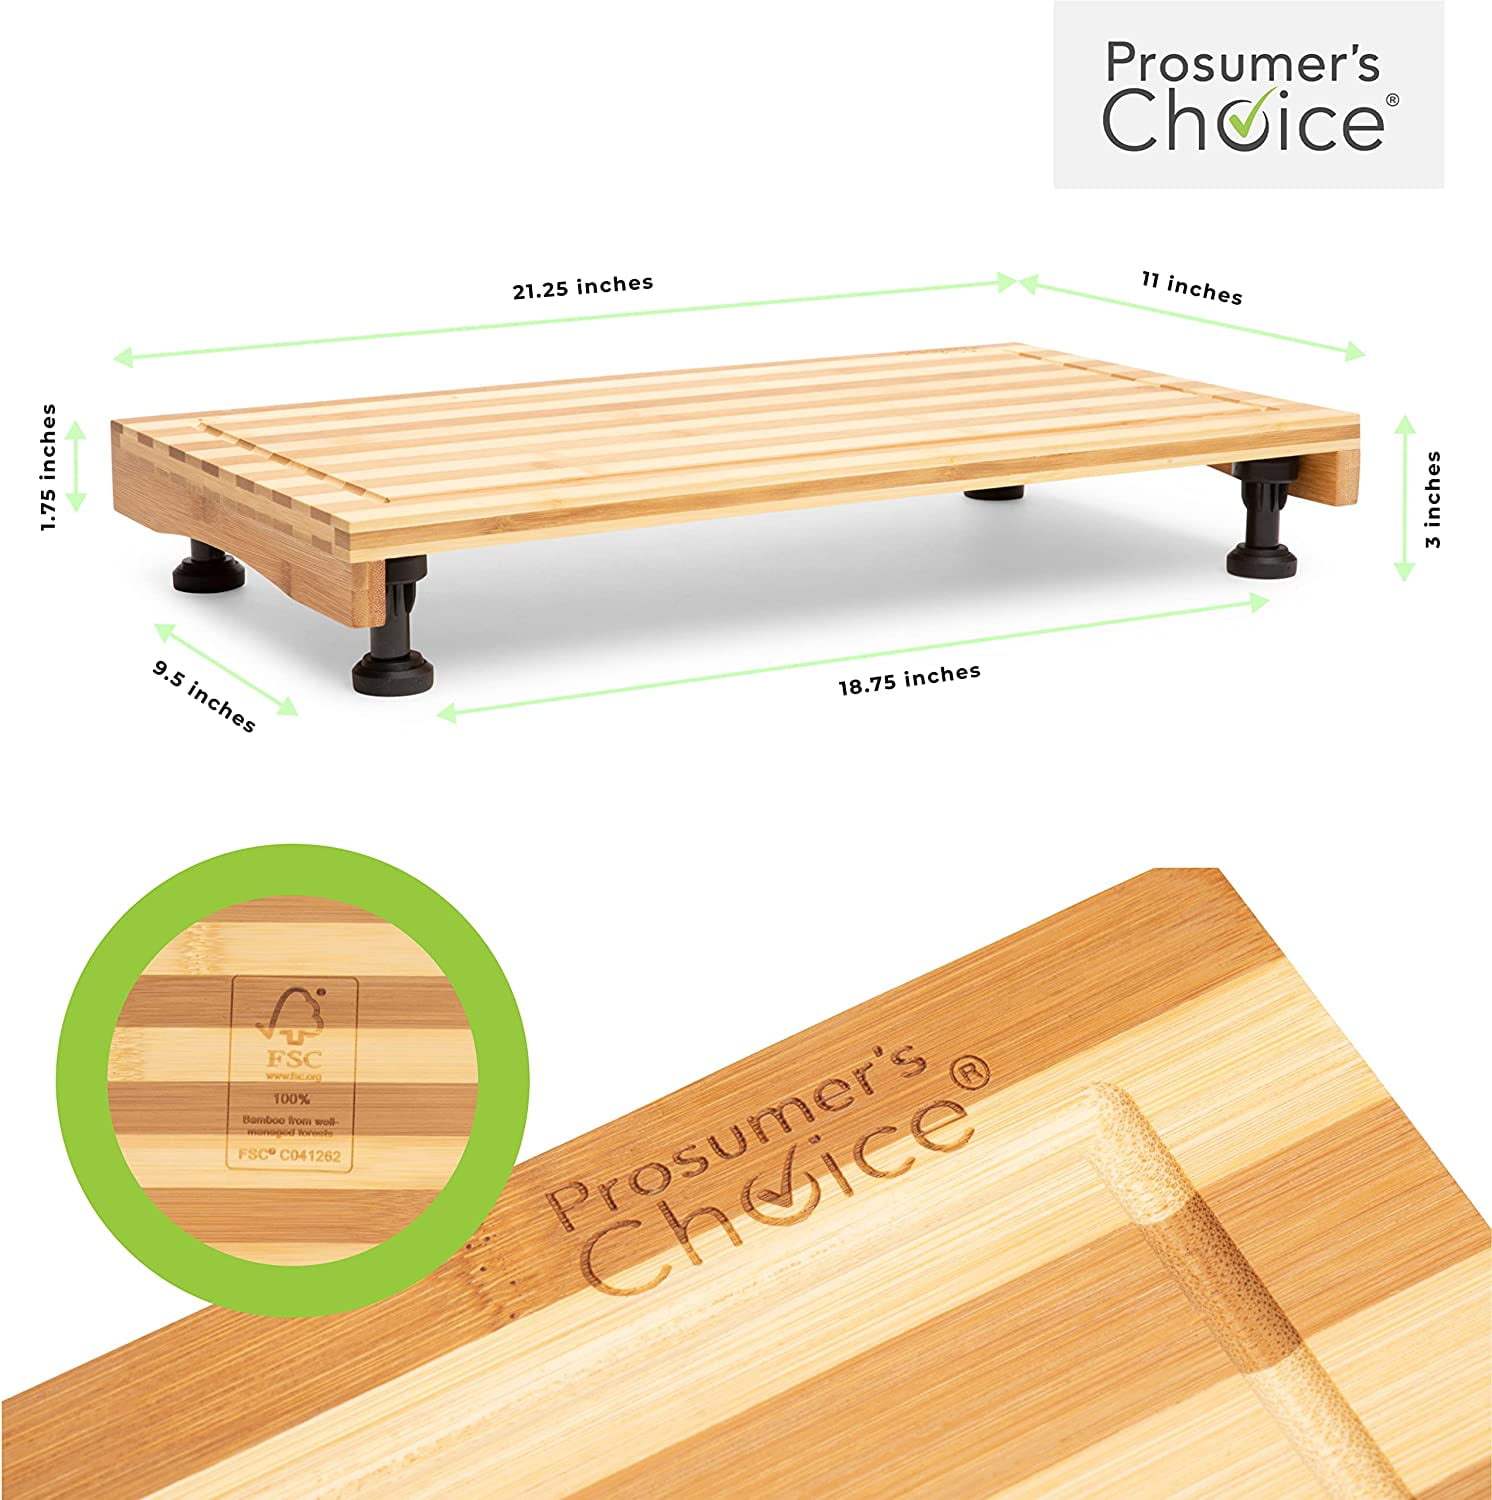 Prosumer's Choice Bamboo Cover and Countertop Cutting Board with Adjustable Legs, Natural